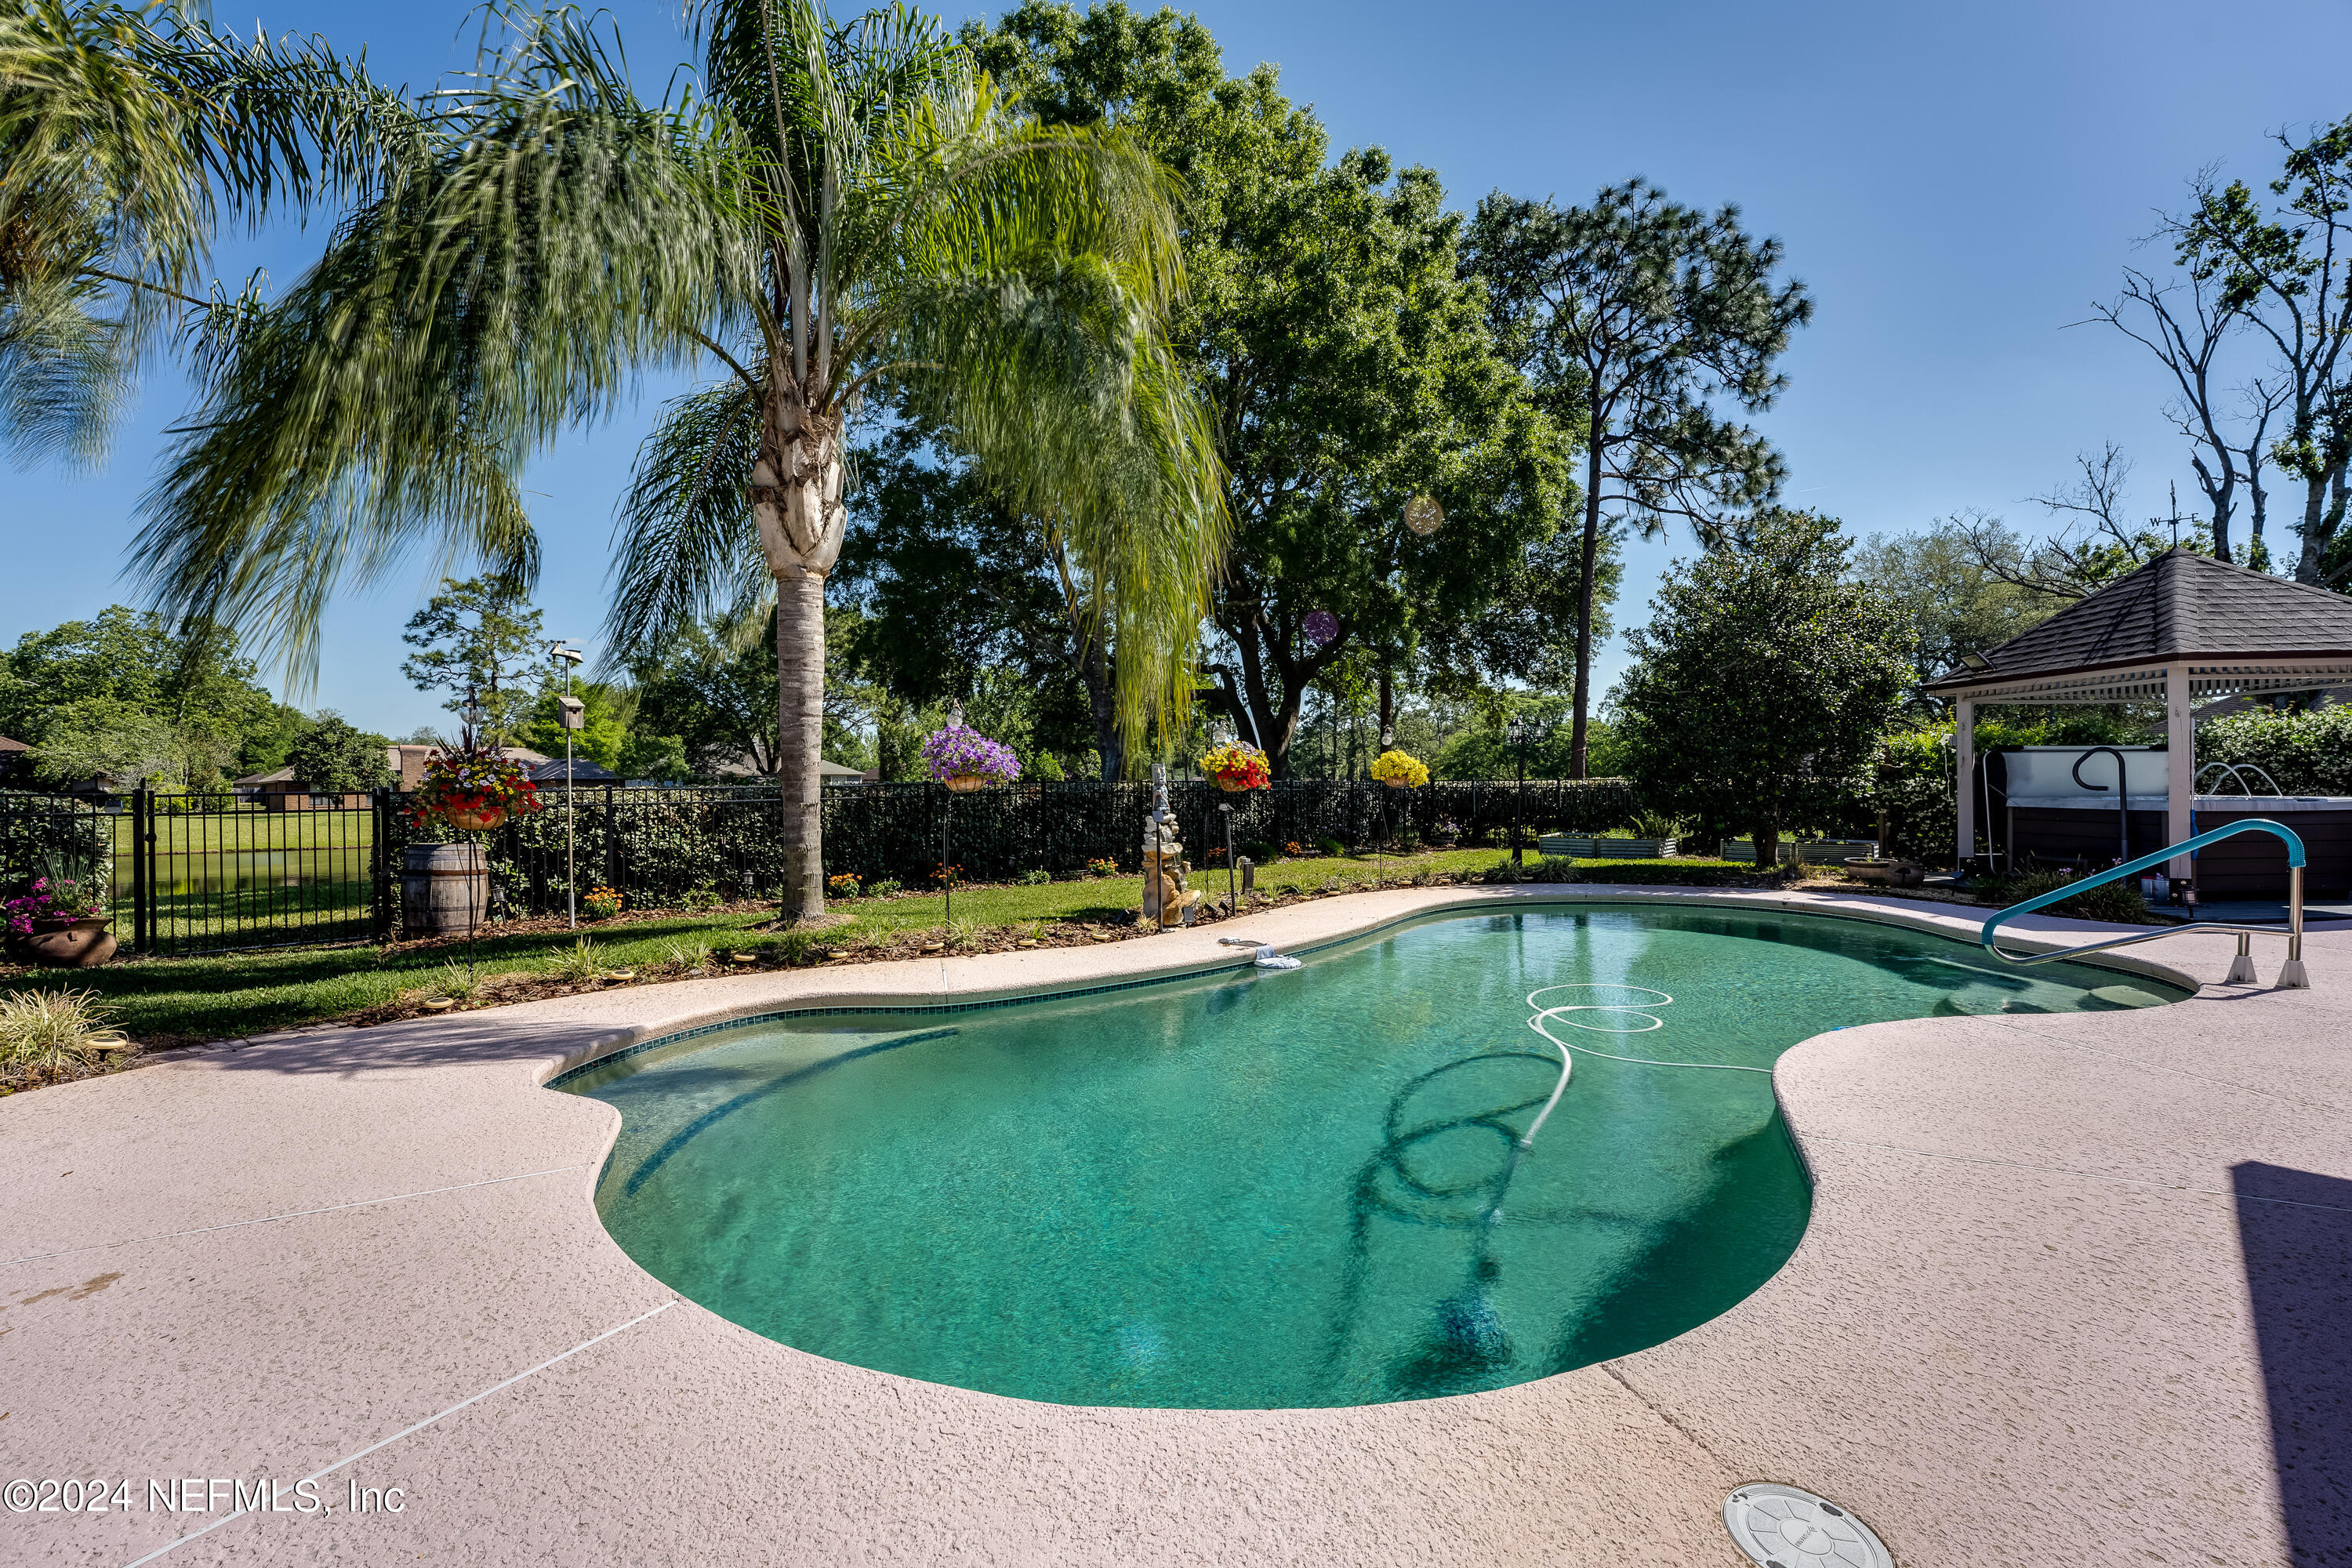 a view of a swimming pool with a yard and palm trees